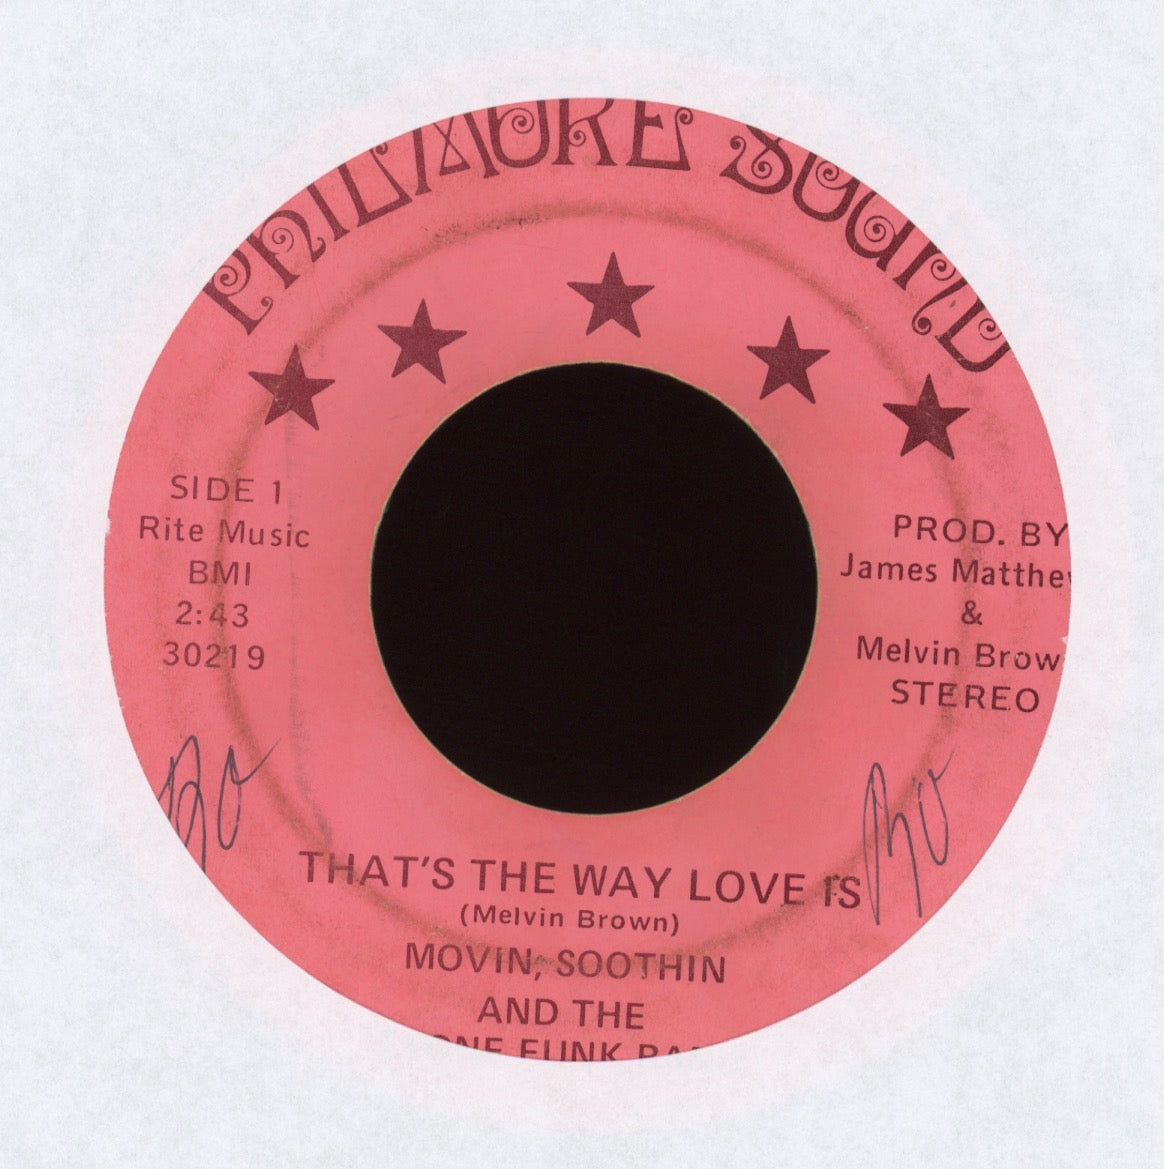 The Movin', Soothin', And Stone Funk Band - That's The Way Love Is on Philmore Sound